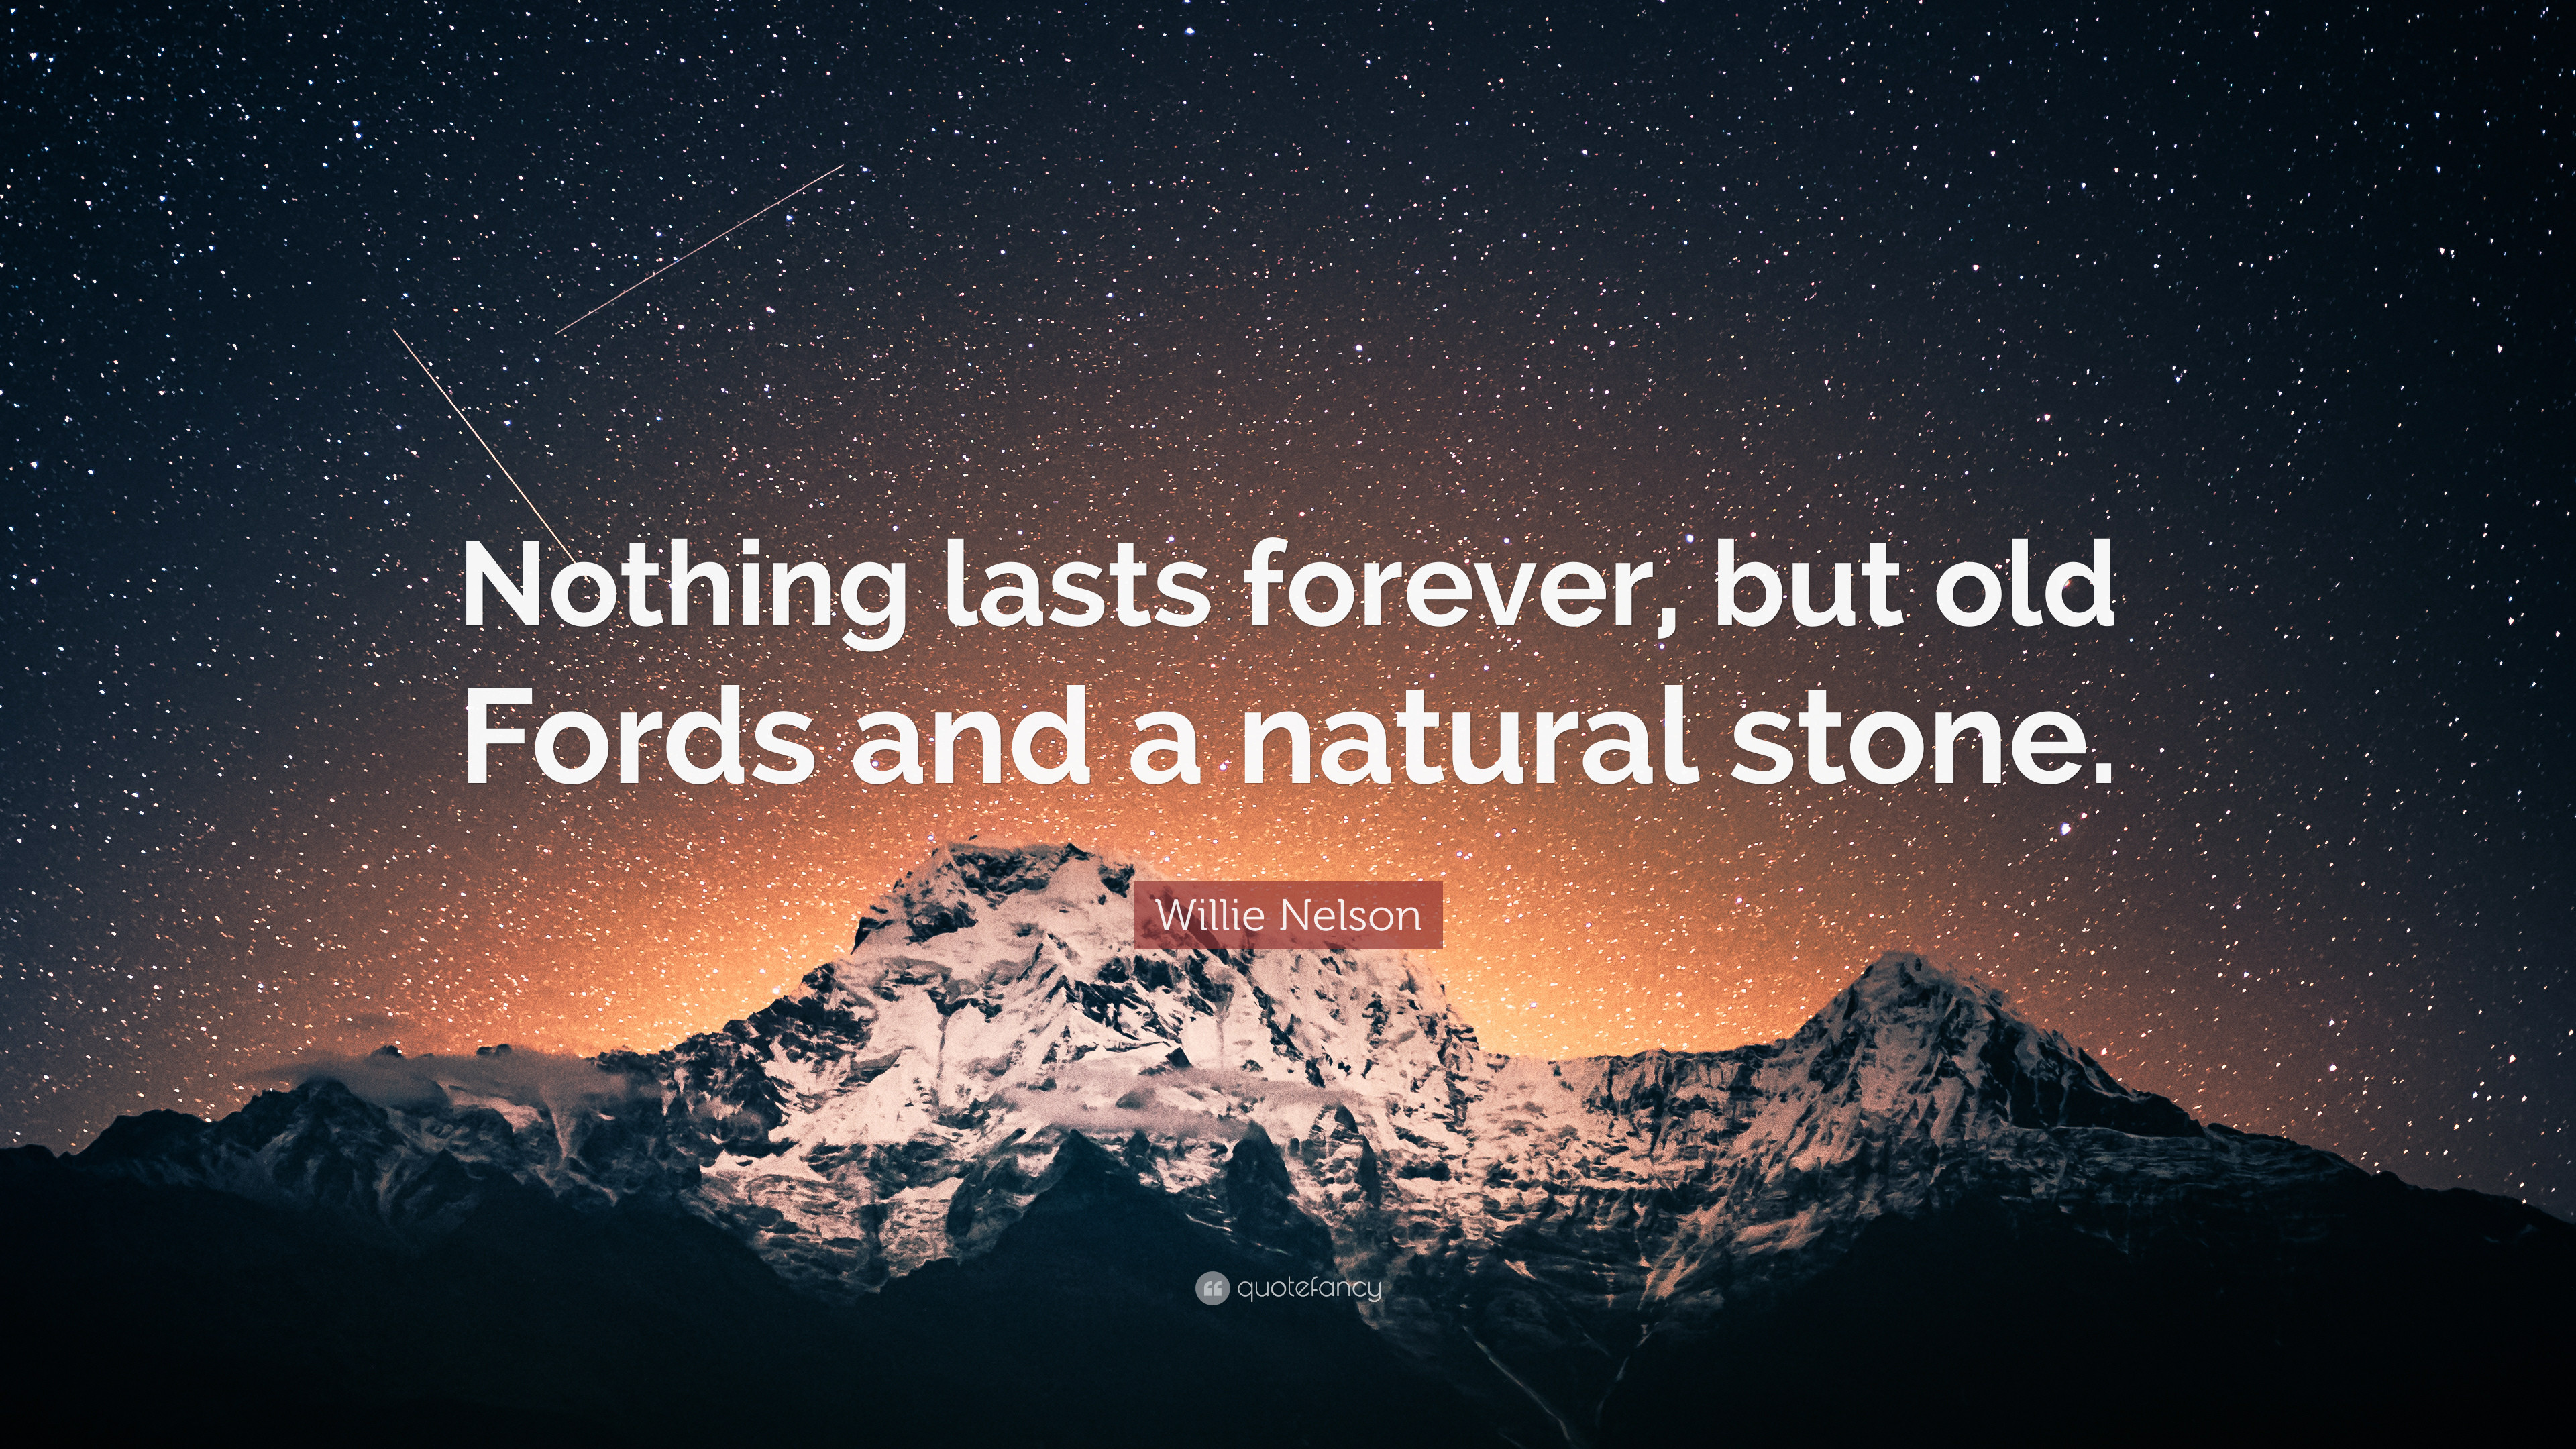 3840x2160 Willie Nelson Quote: “Nothing lasts forever, but old Fords and a natural  stone